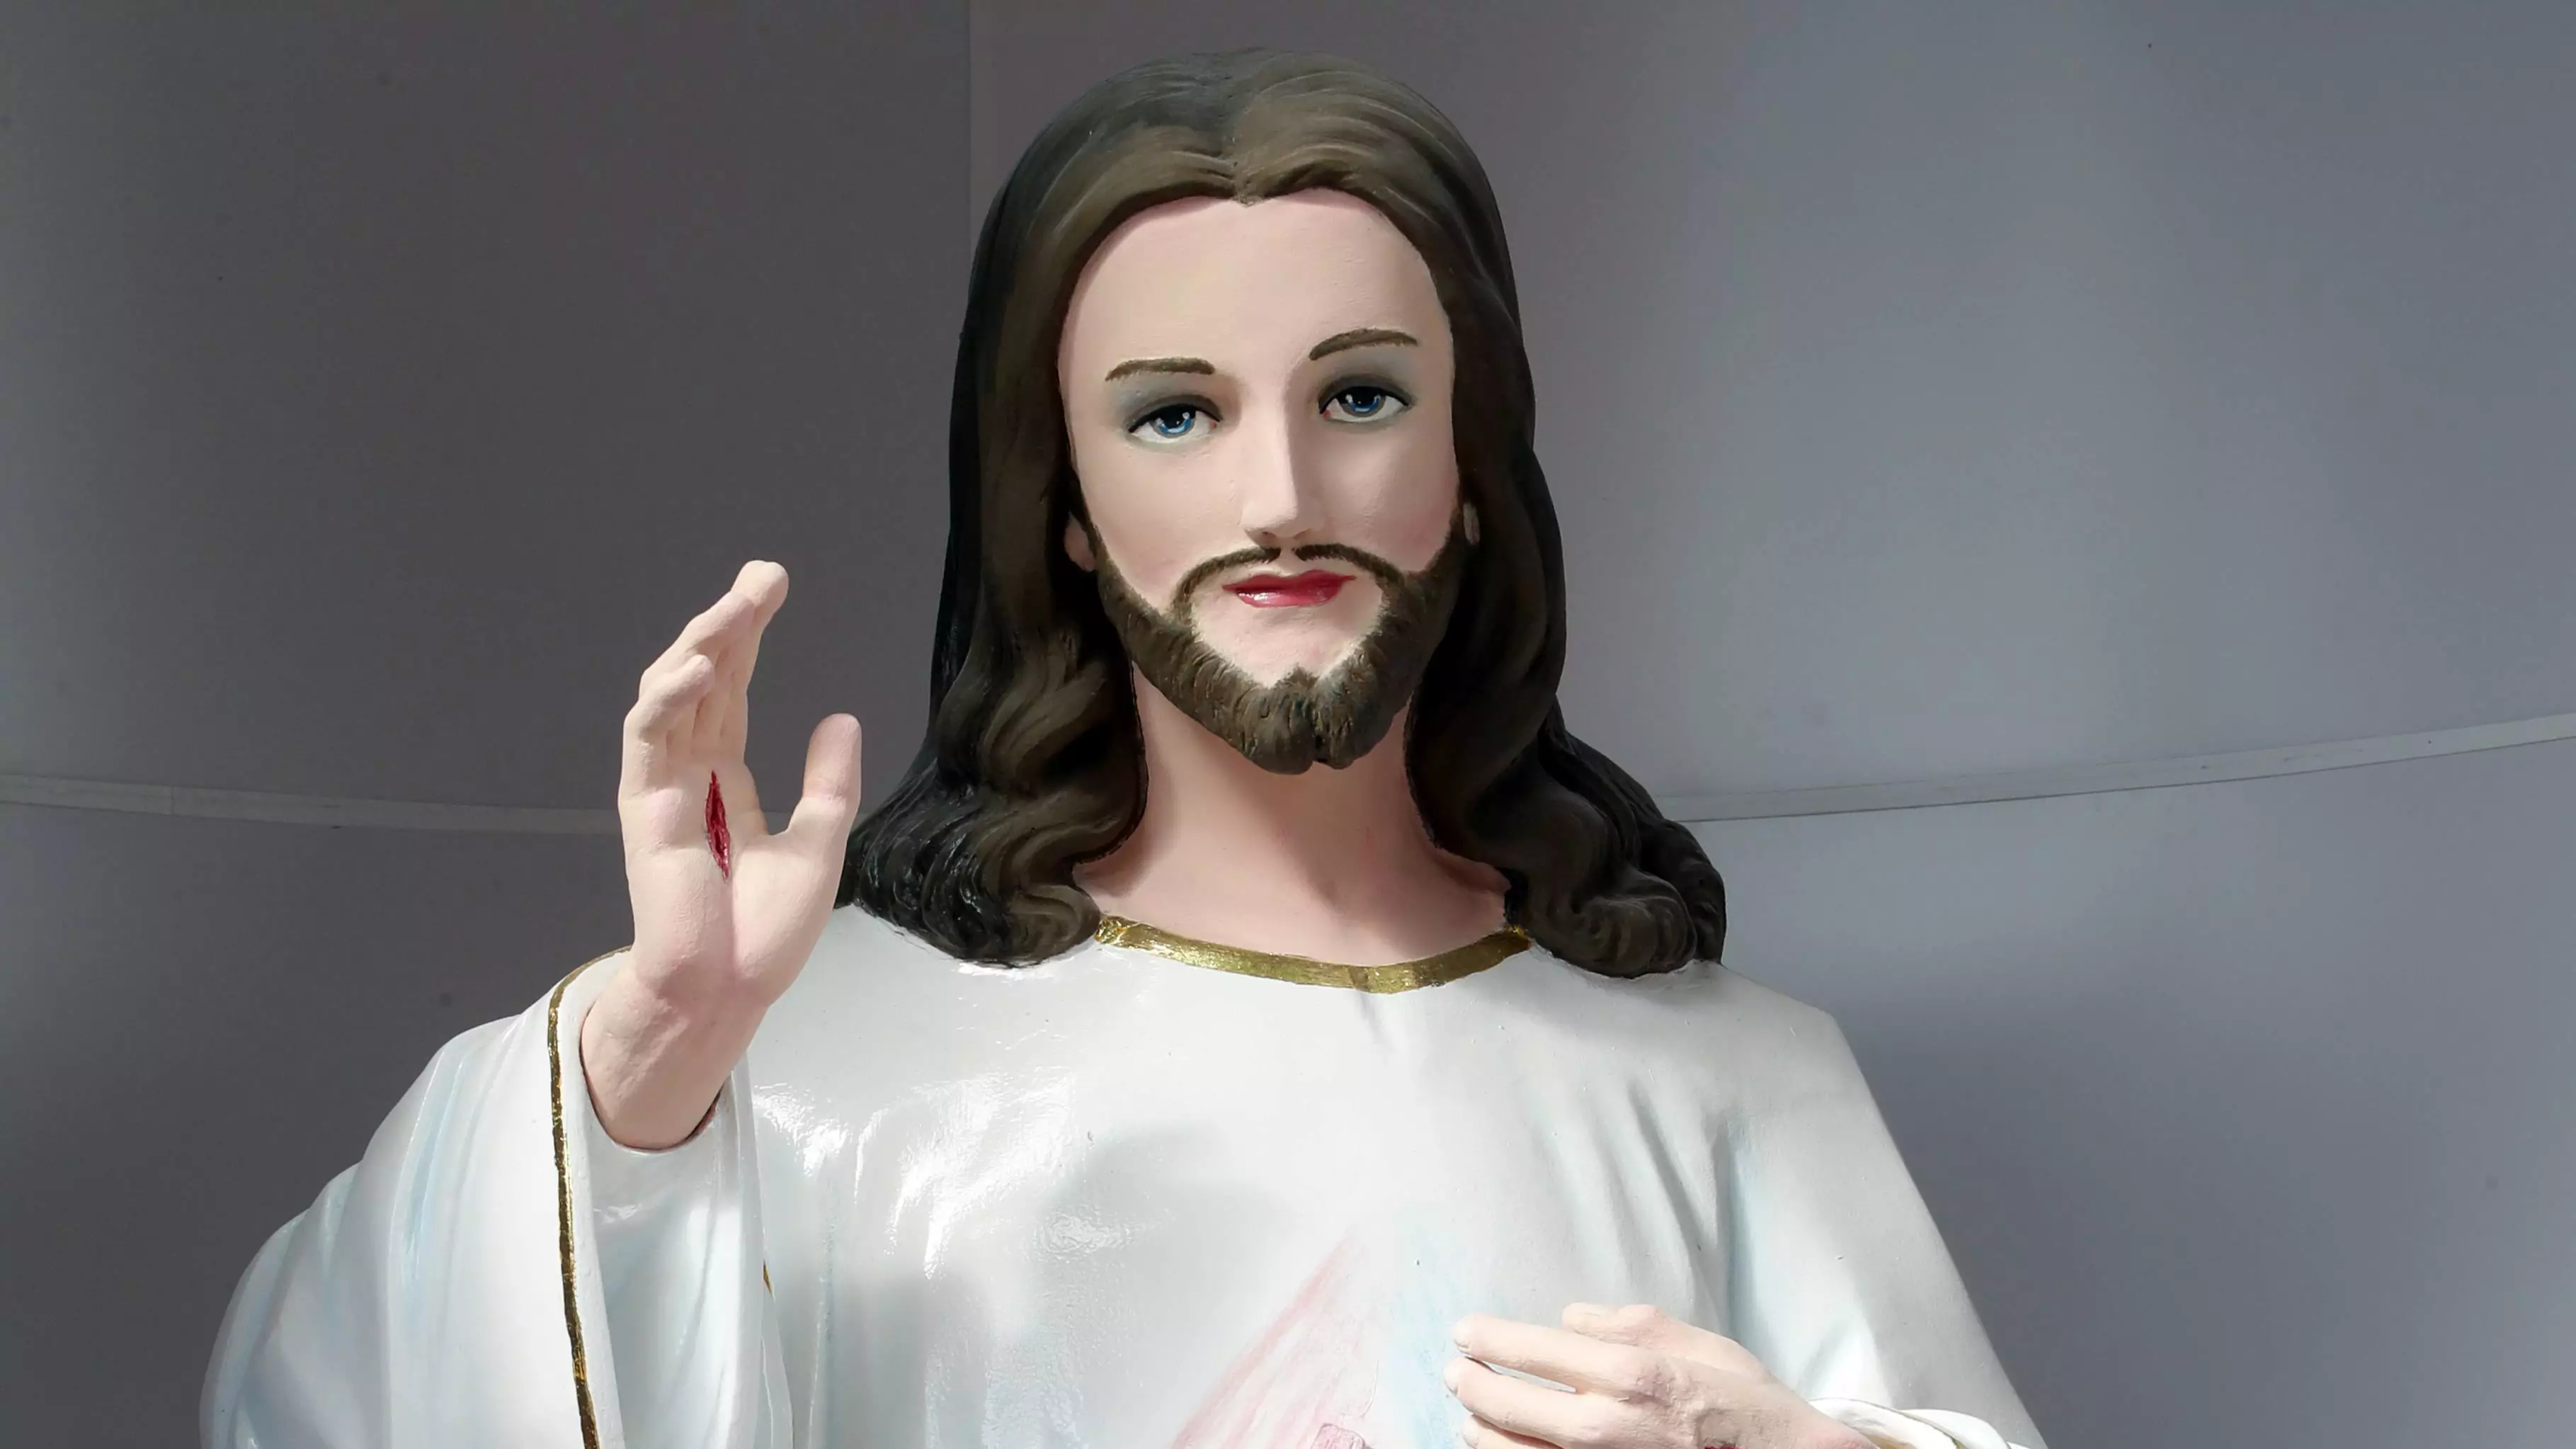 Statue Of Jesus Christ Found Beheaded In US Church 